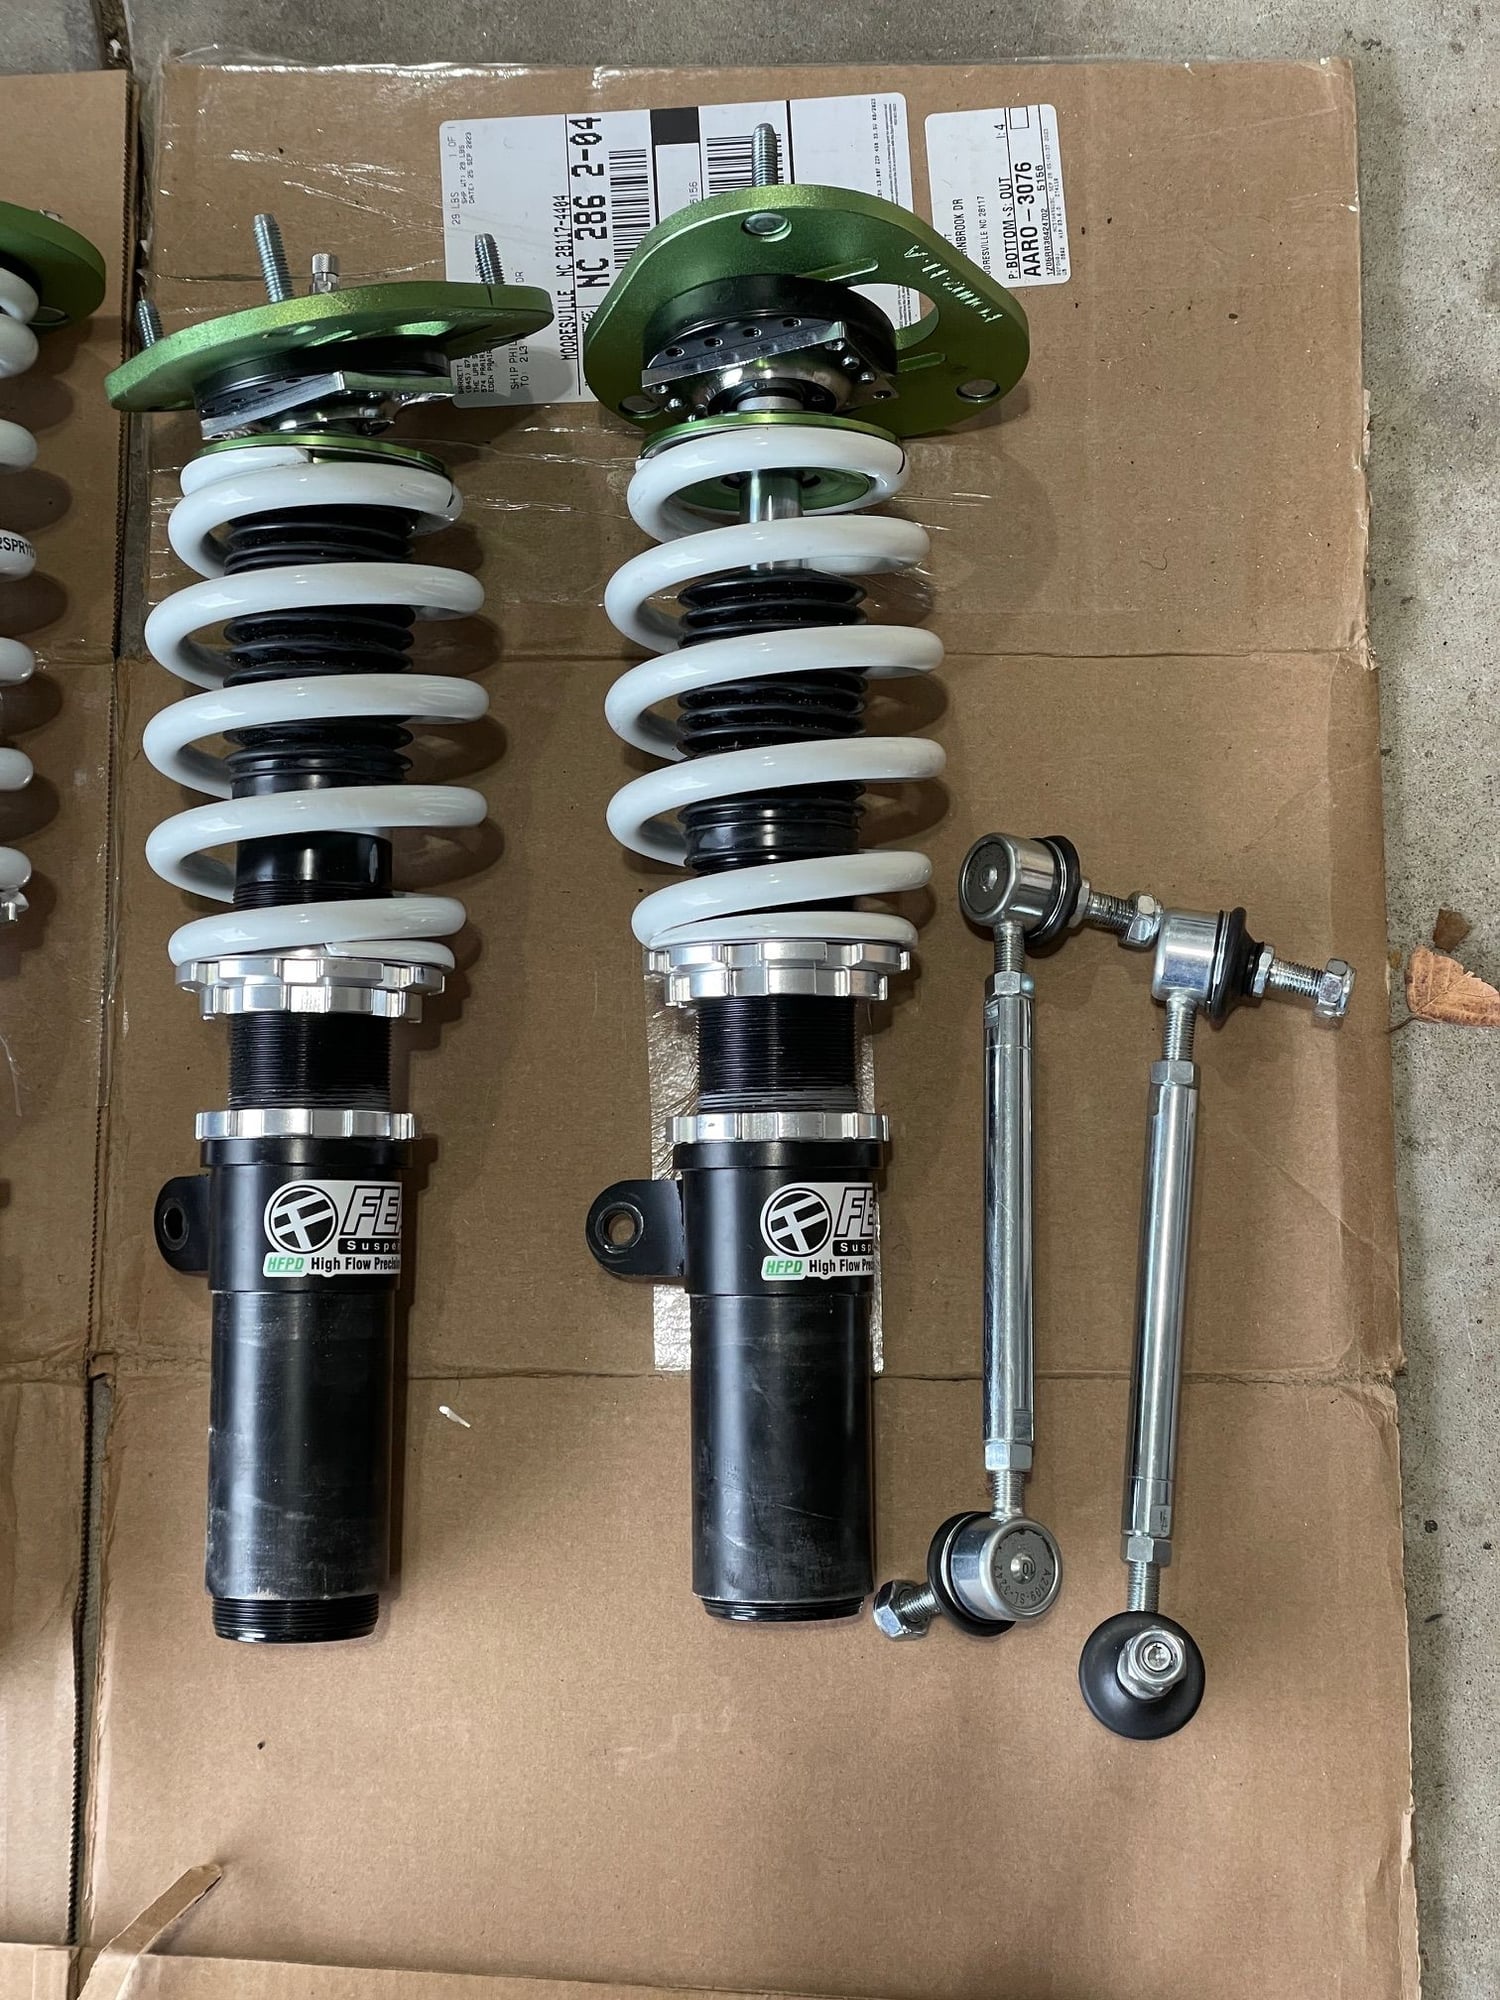 Steering/Suspension - Feal 441 Coilvers + StanceParts Front Air Cups - 997 C4/C4S/Turbo - Used - Mooresville, NC 28117, United States